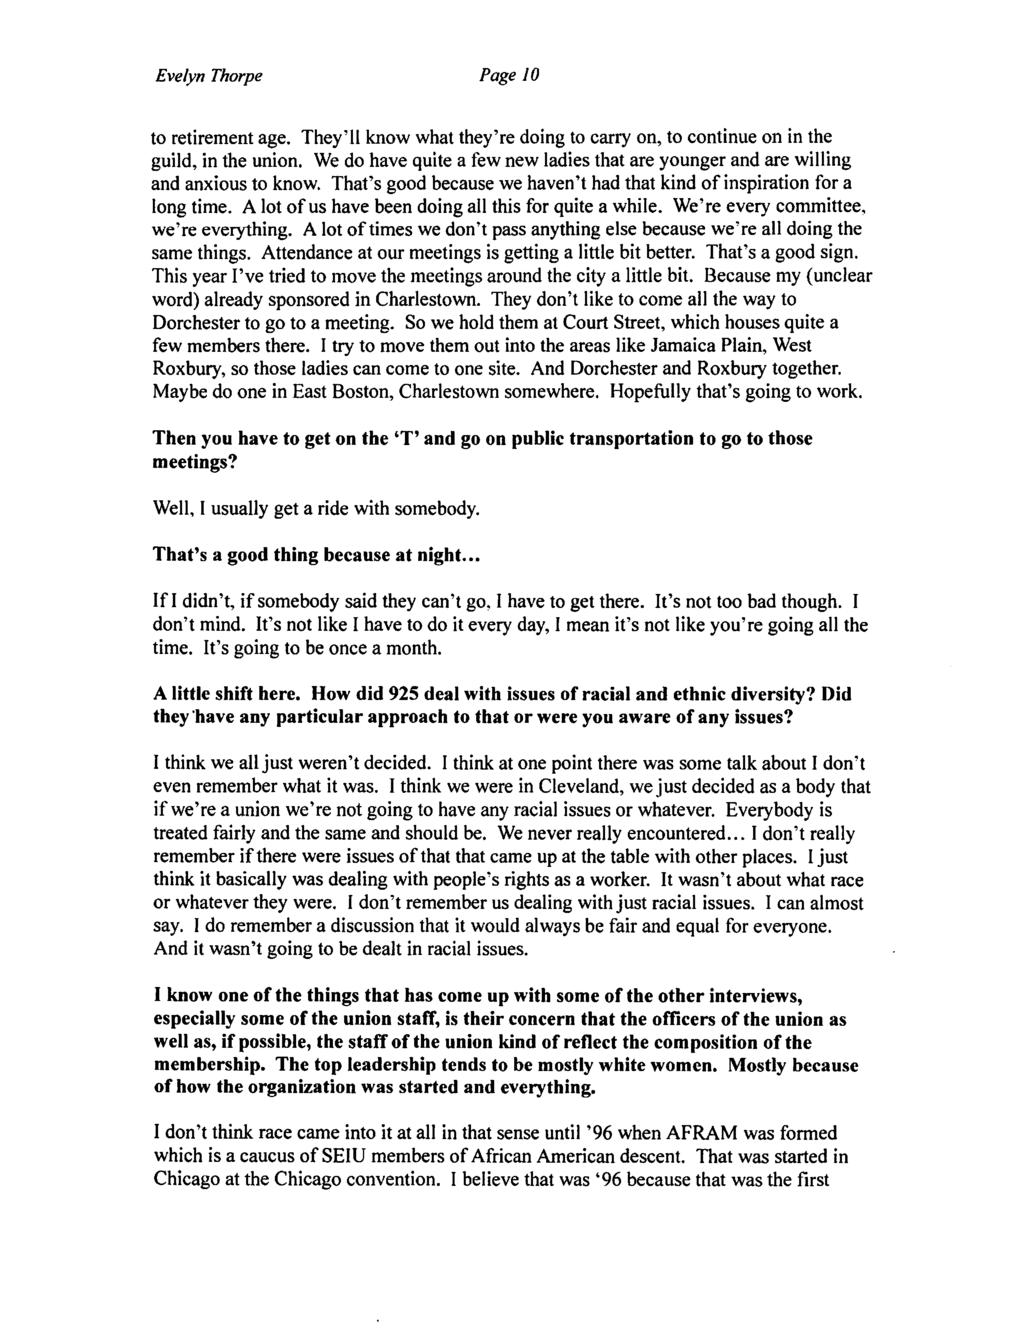 Evelyn Thorpe Page 10 to retirement age. They'll know what they're doing to carry on, to continue on in the guild, in the union.